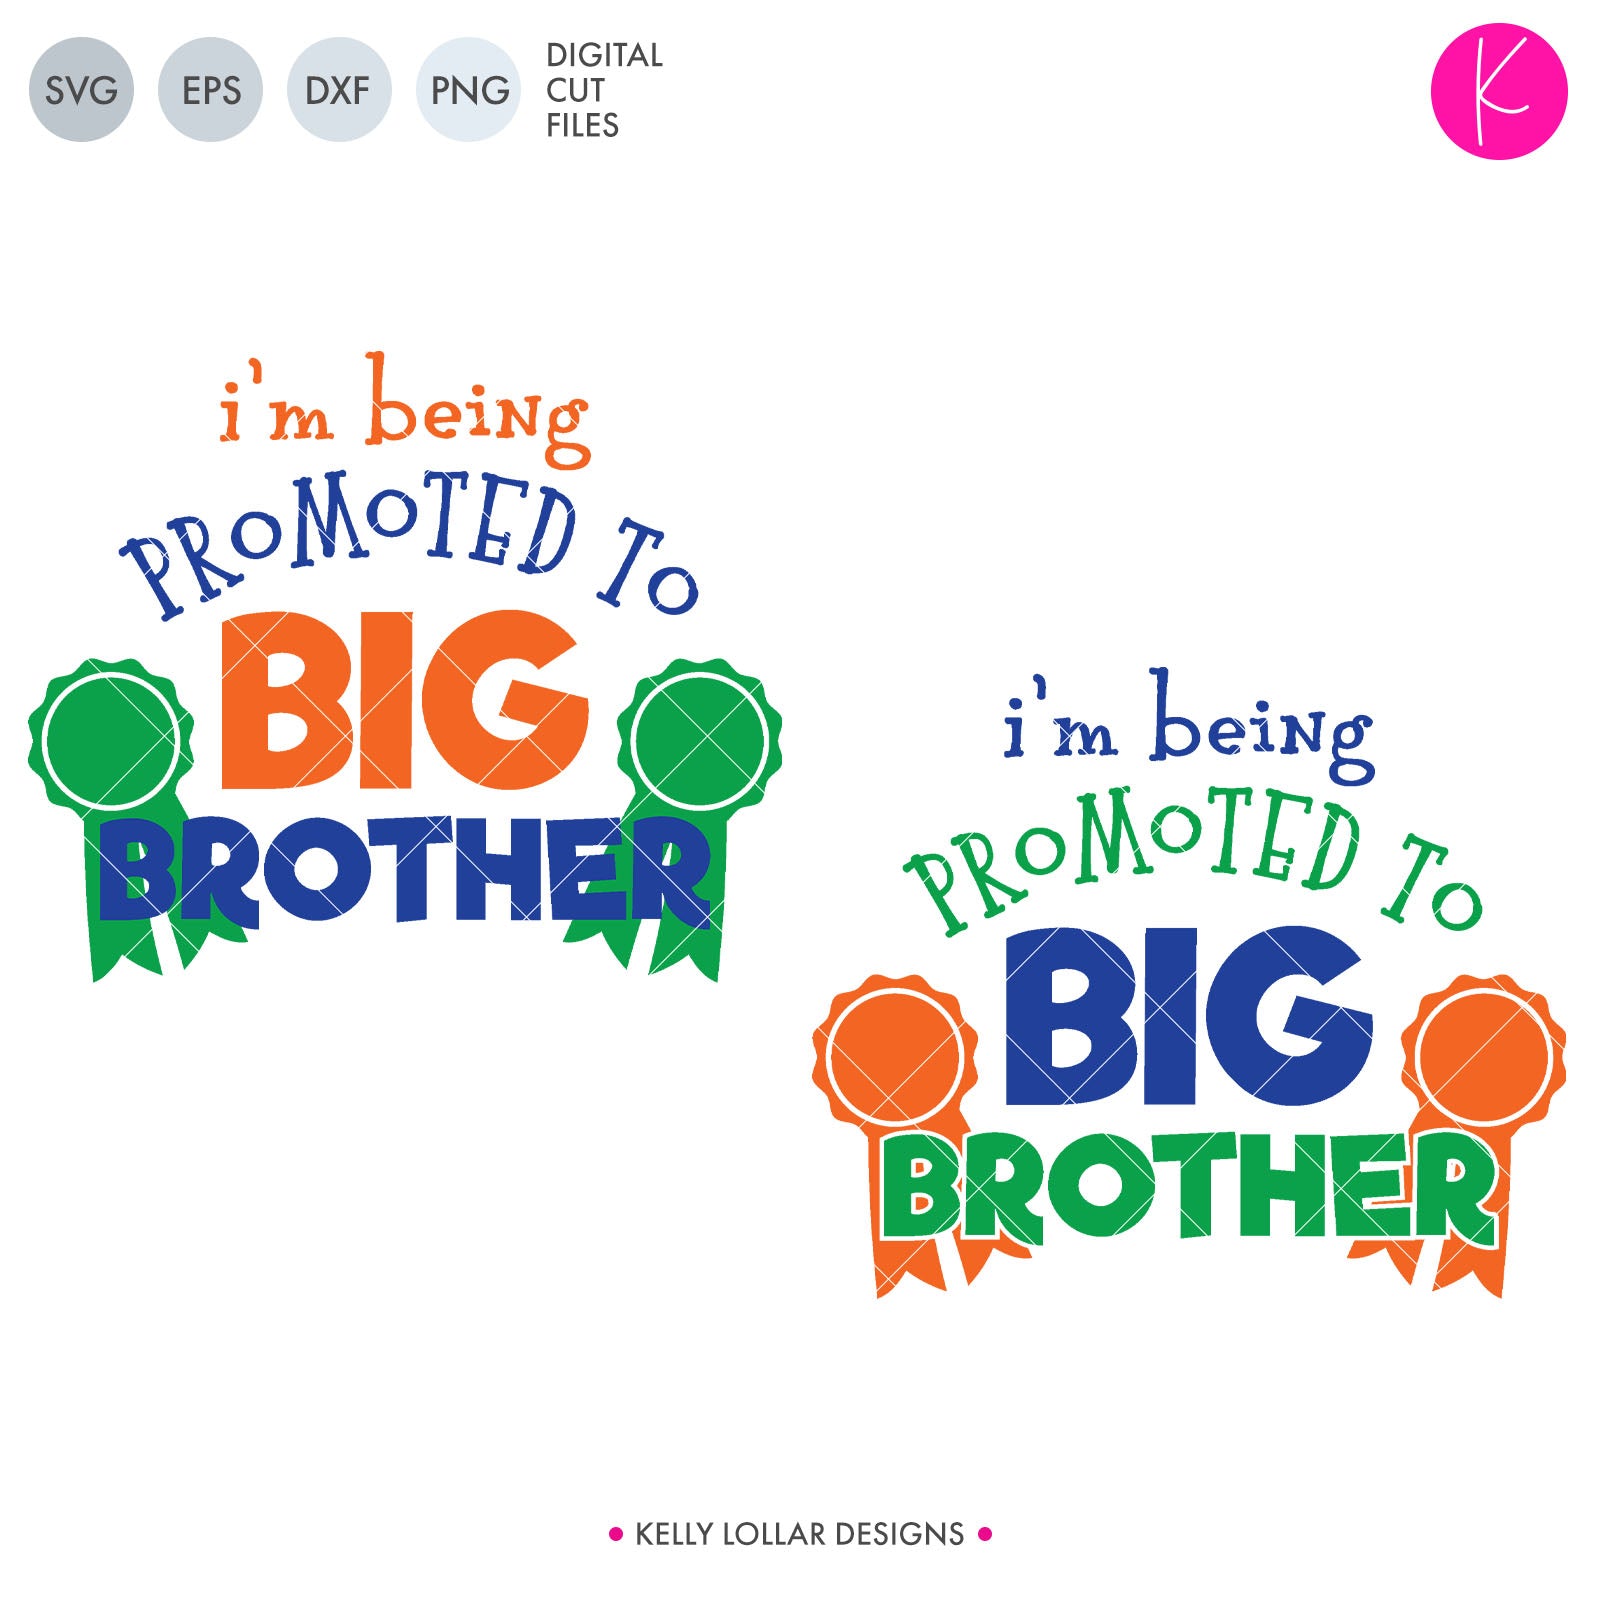 I'm Being Promoted to Big Brother | SVG DXF EPS PNG Cut Files